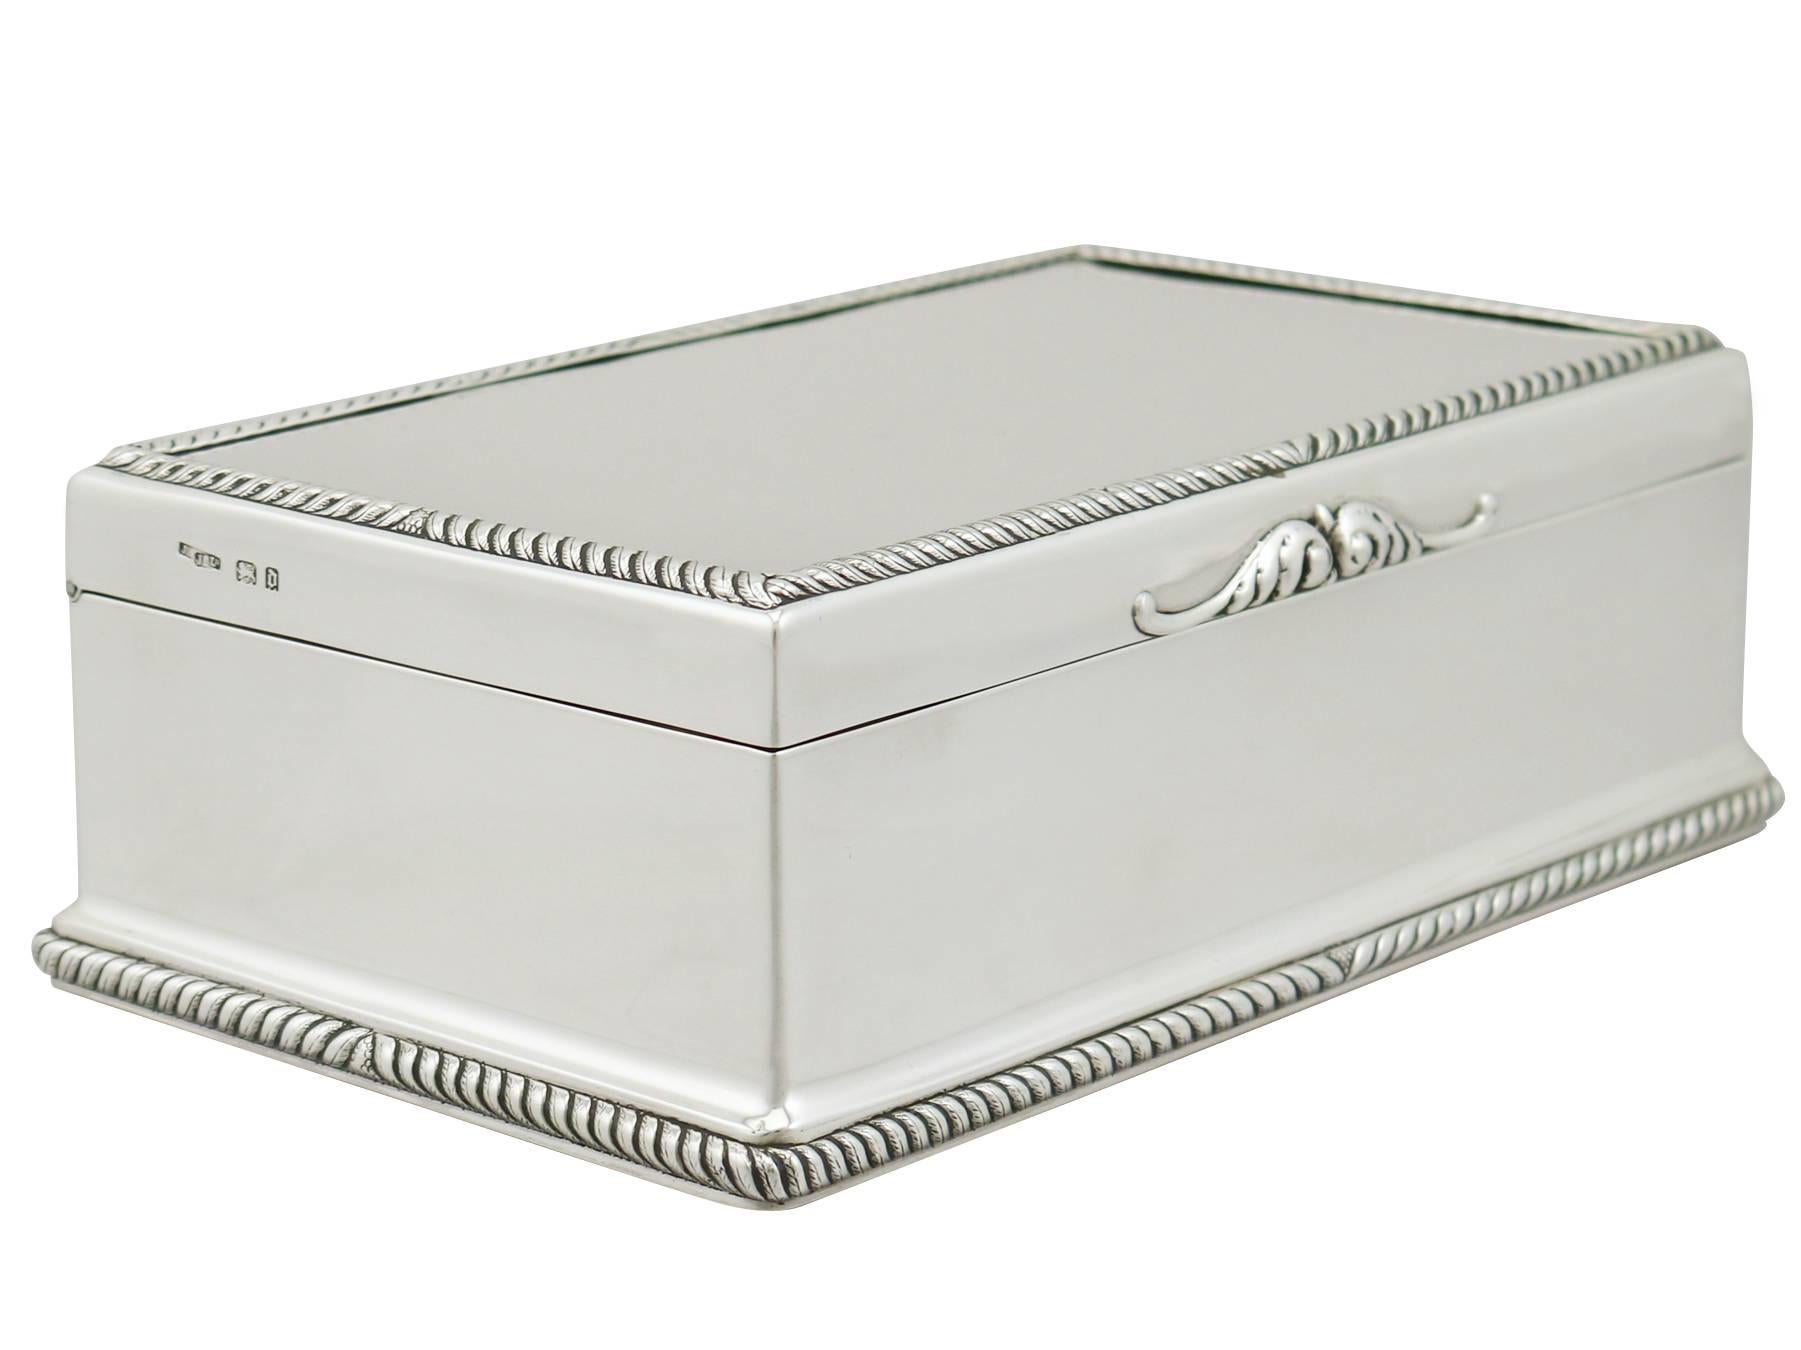 An exceptional, fine and impressive antique George V English sterling silver jewellery box in the Regency style; an addition to our collection of boxes and cases.

This exceptional antique George V sterling silver jewellery box has a plain